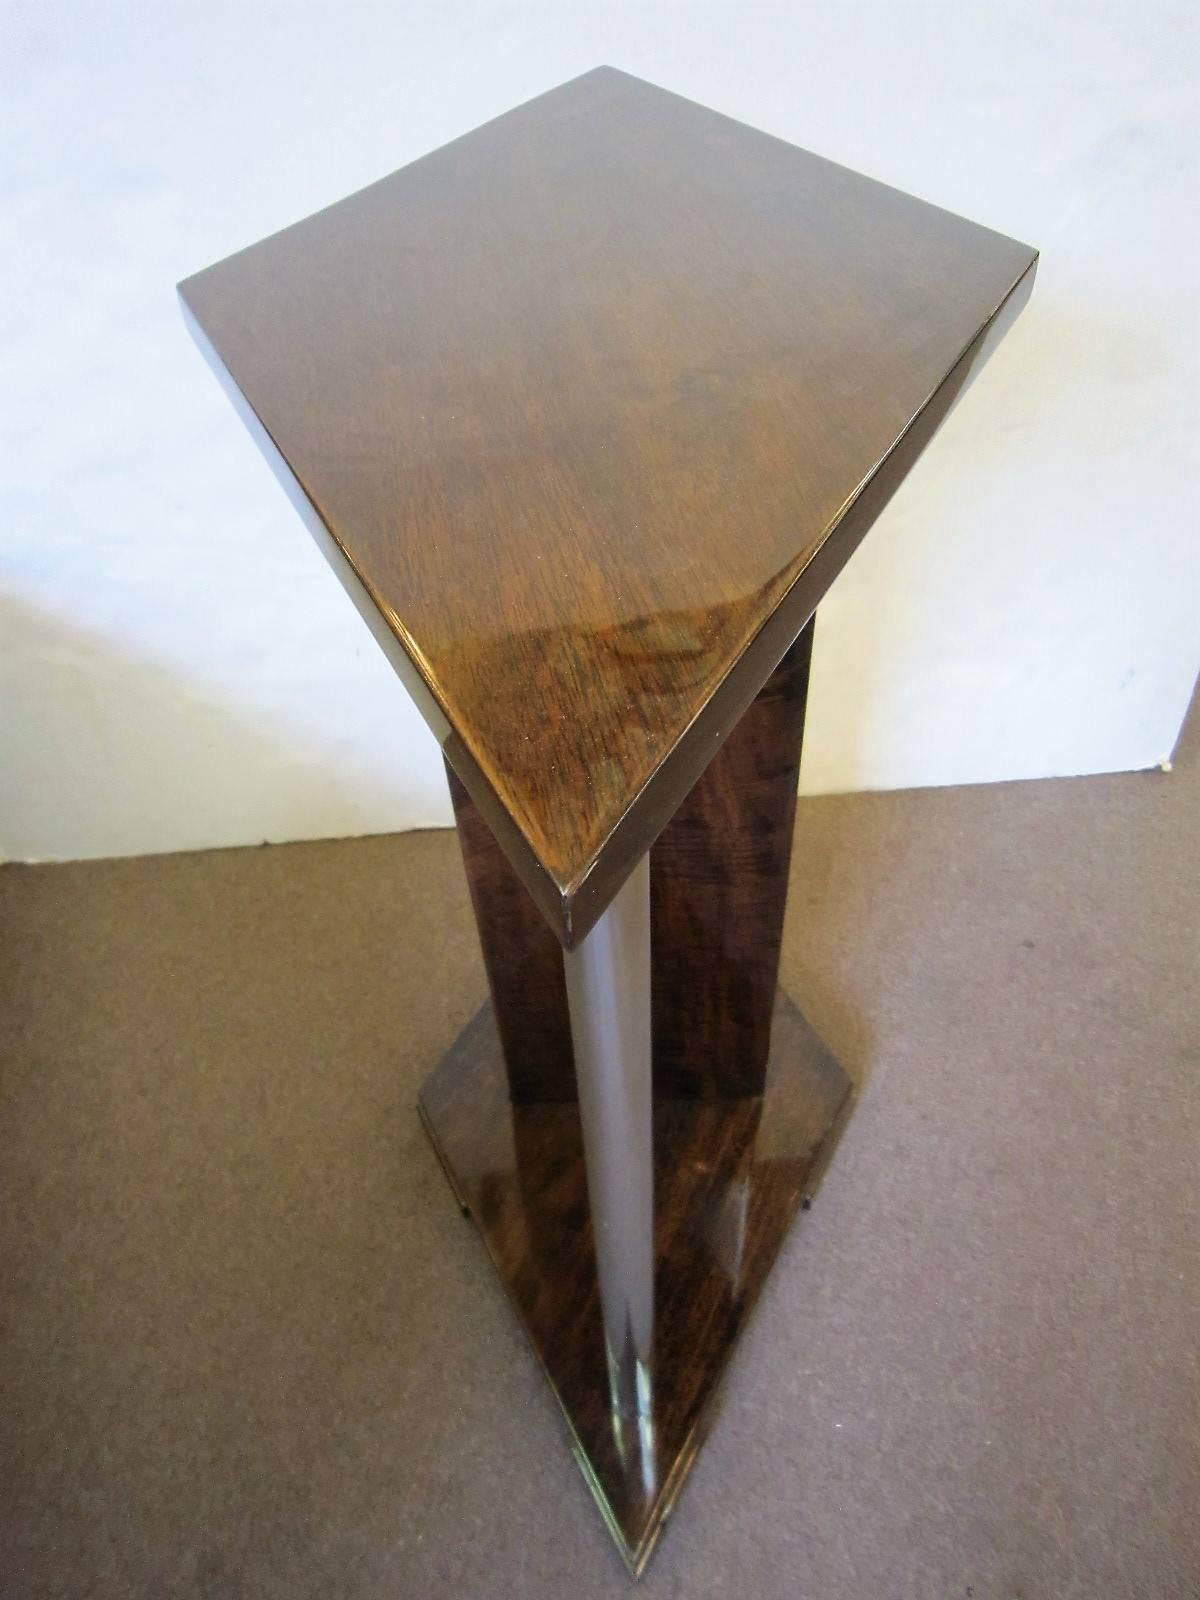 French Art Deco Unusual Diamond Shaped Walnut Side Table with Nickel Supports For Sale 4